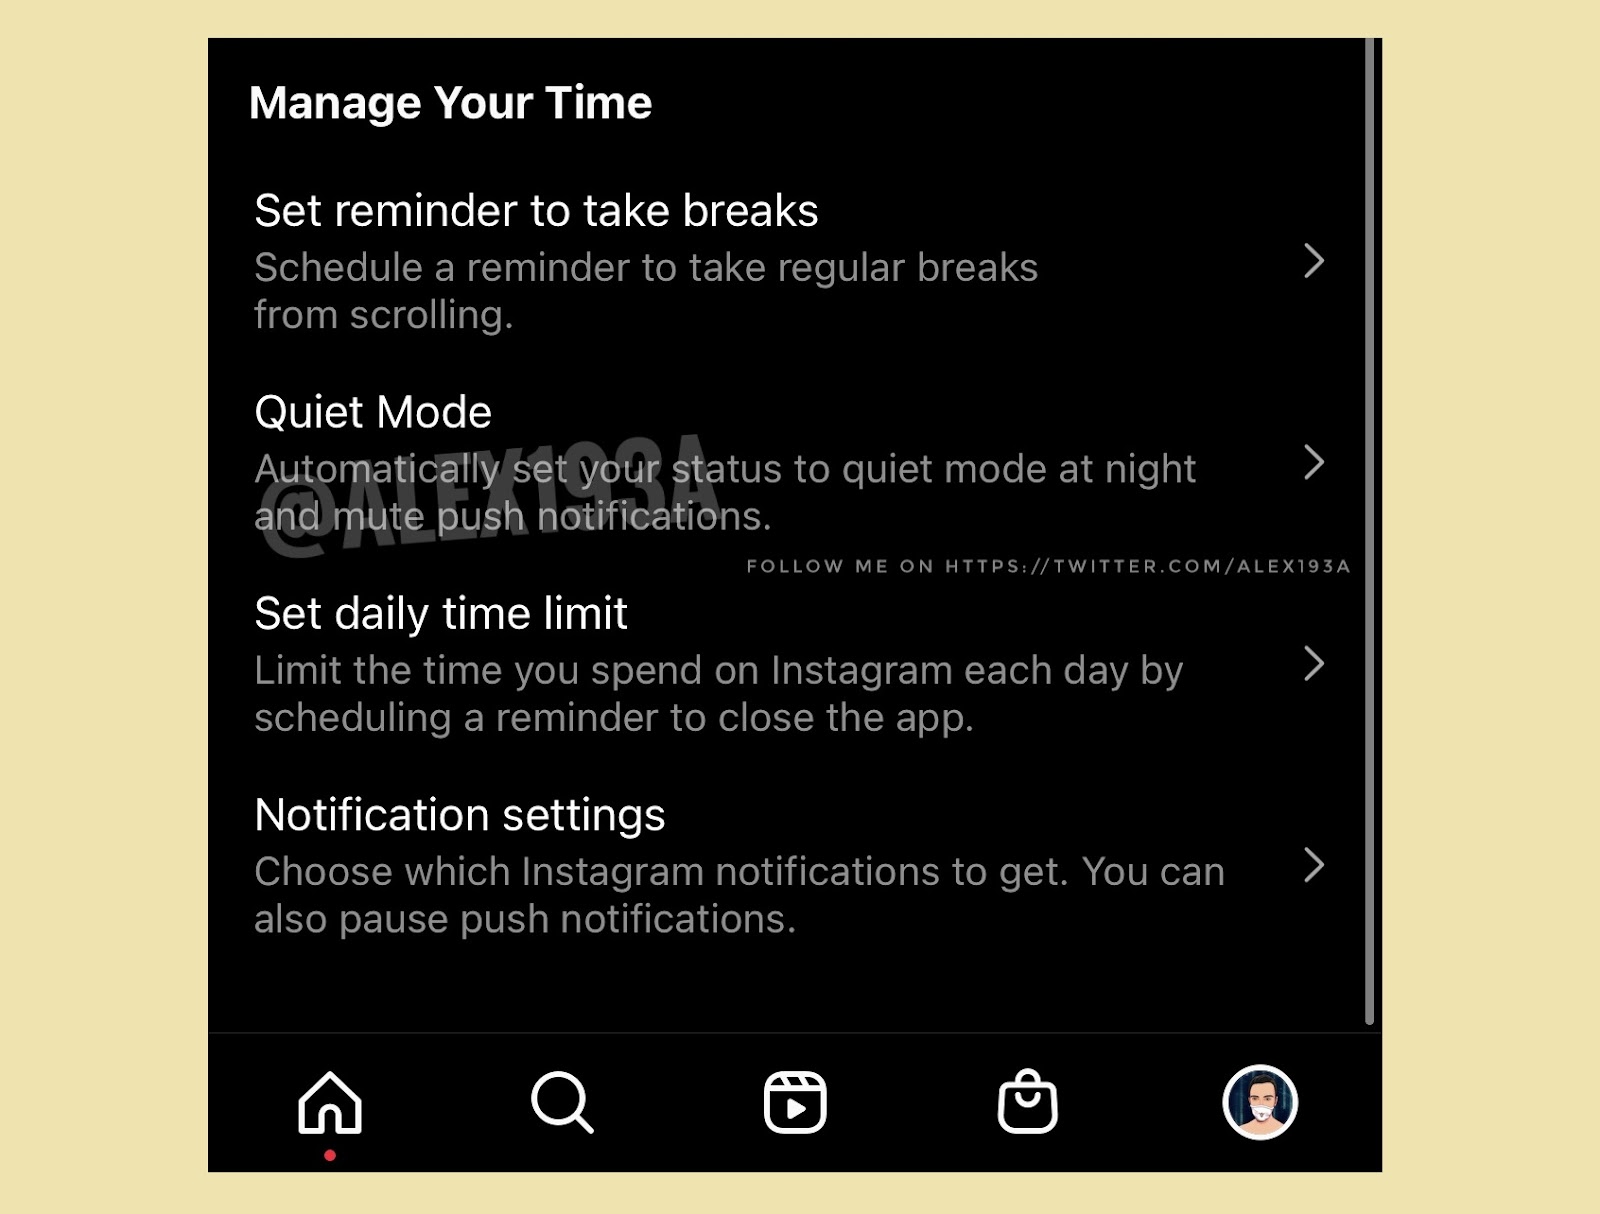 Instagram Quiet Mode: A New Way to Manage Your Time and Focus